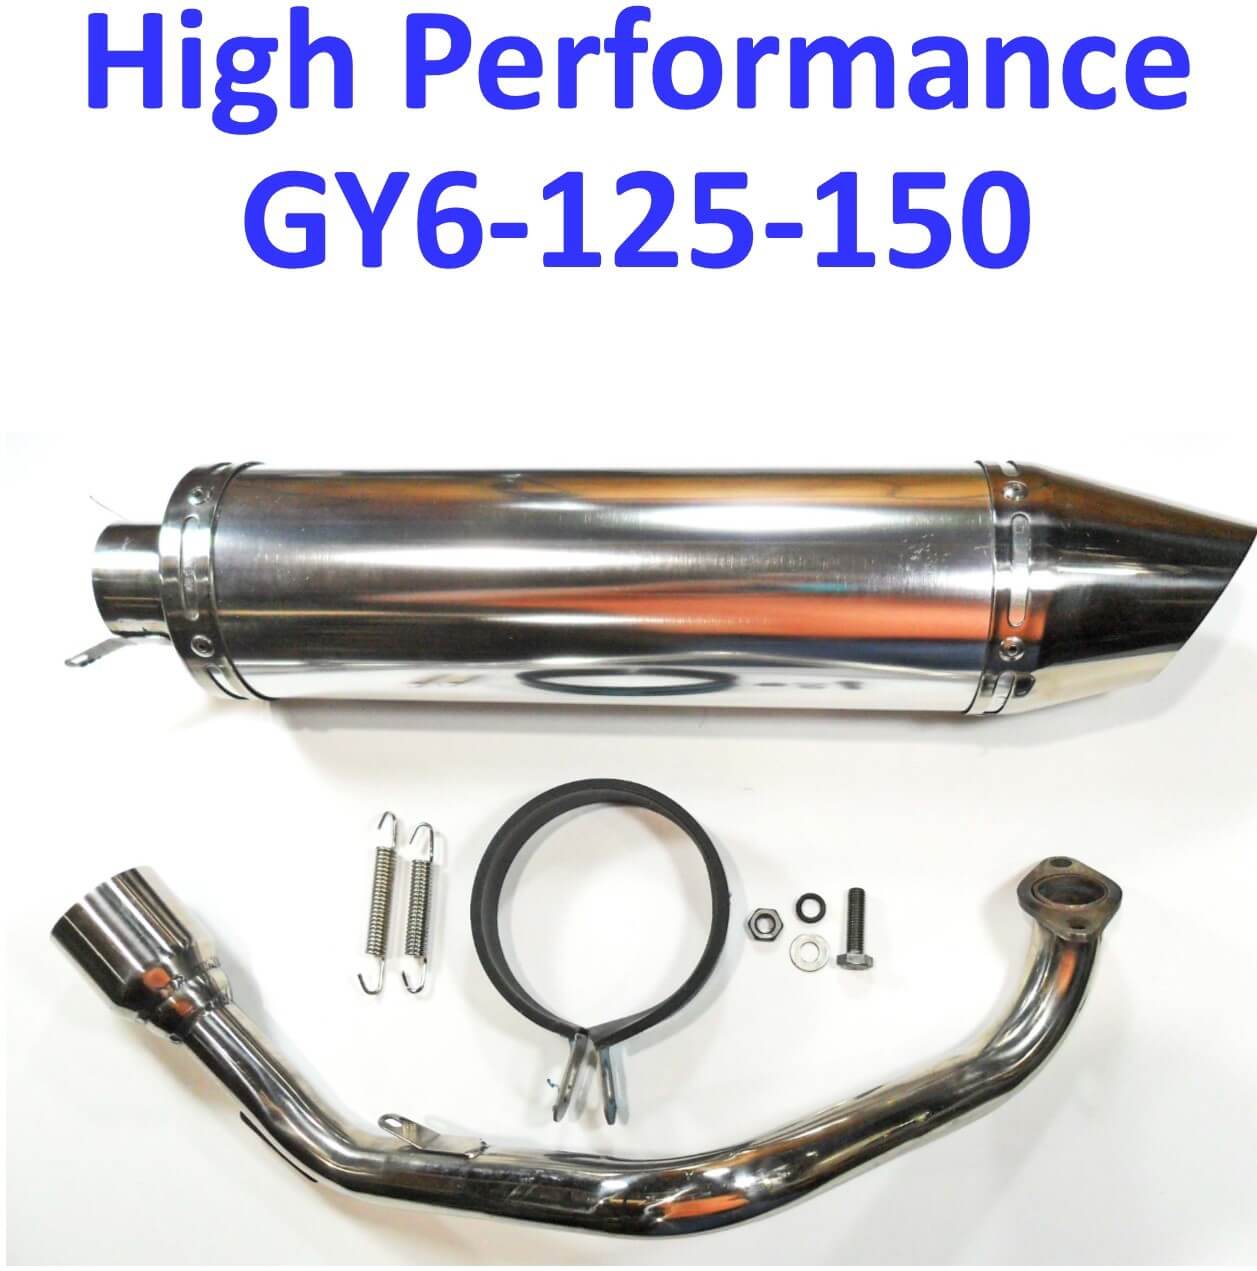 Exhaust Pipe HIGH PERFORMANCE - CHROME Fits Most GY6-125, GY6-150 Chinese Scooters Canister Length (including tip)=17 1/4" Canister Diameter=4"